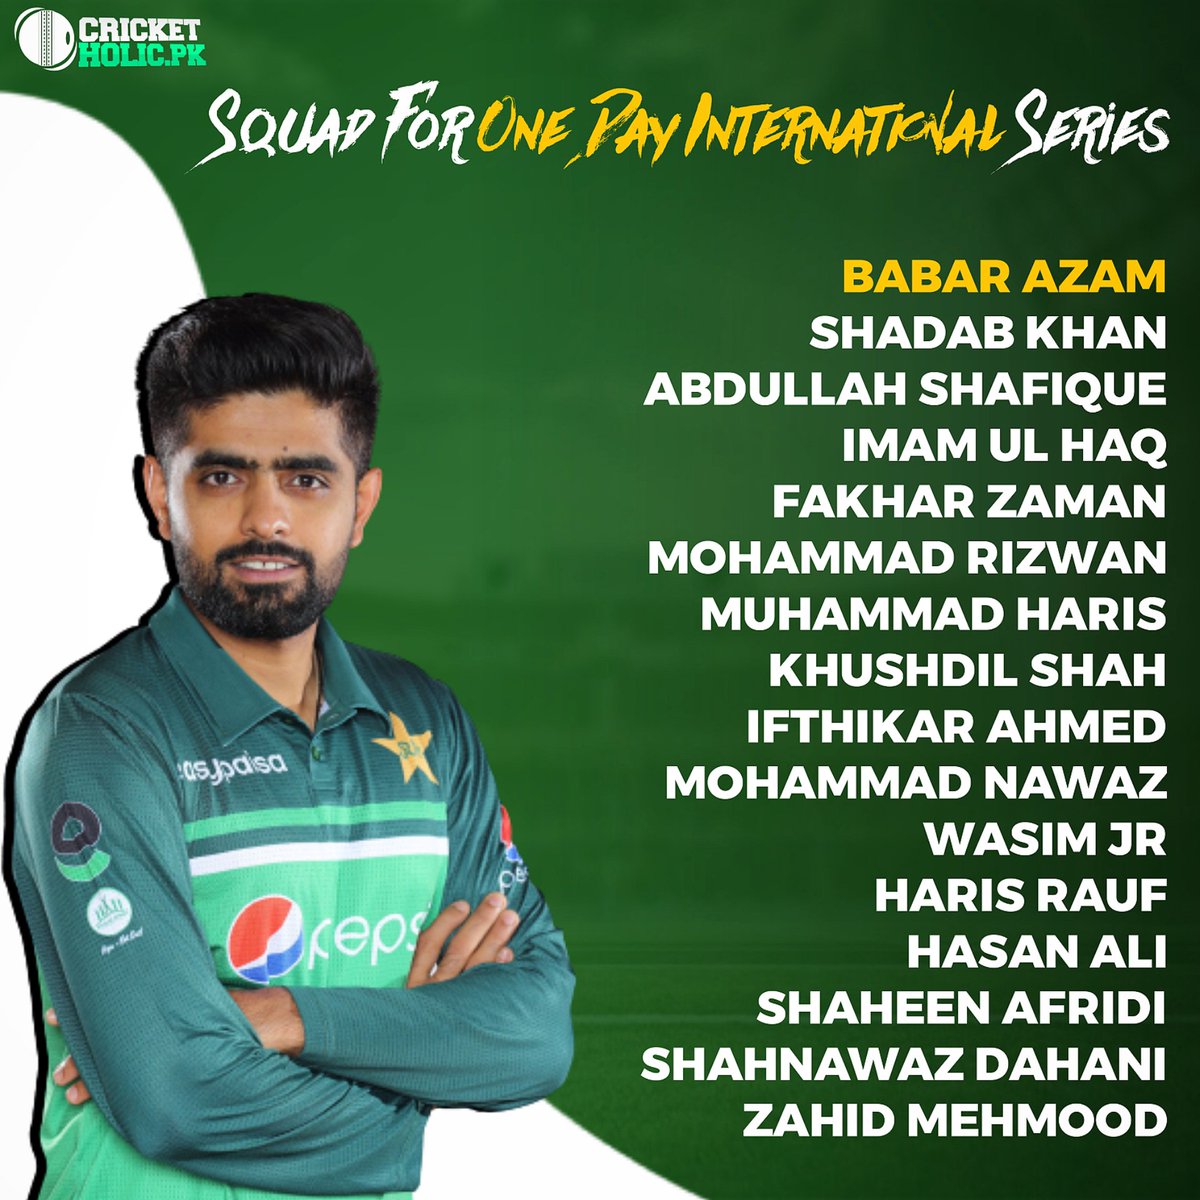 Pakistan's Squad is out 📢 for the 𝗢𝗗𝗜 𝗦𝗲𝗿𝗶𝗲𝘀 against West Indies 🔥

#PAKvWI #WIvPAK #Pakistan #Cricket #BabarAzam